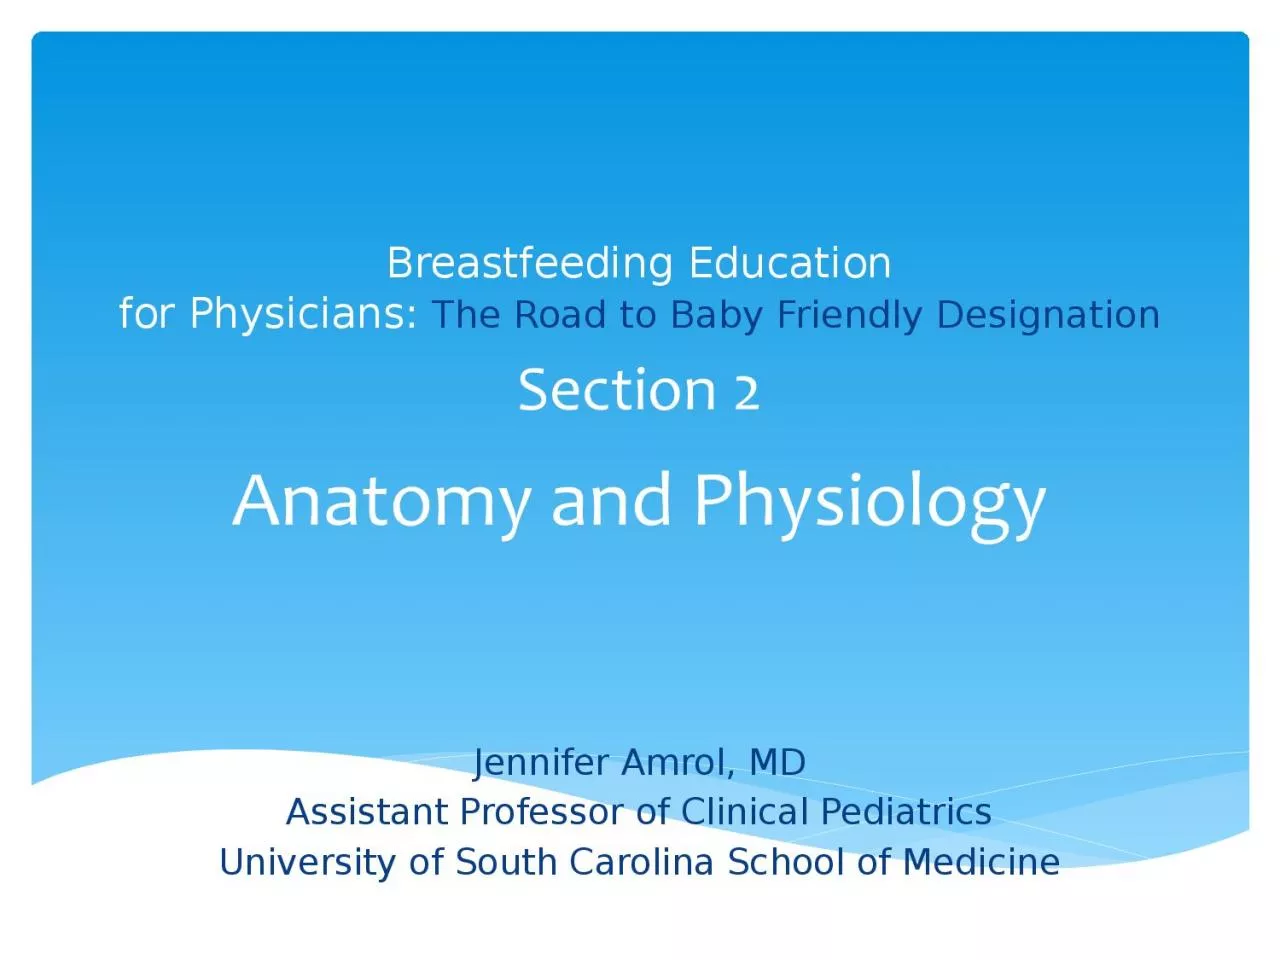 Breastfeeding Education for Physicians: